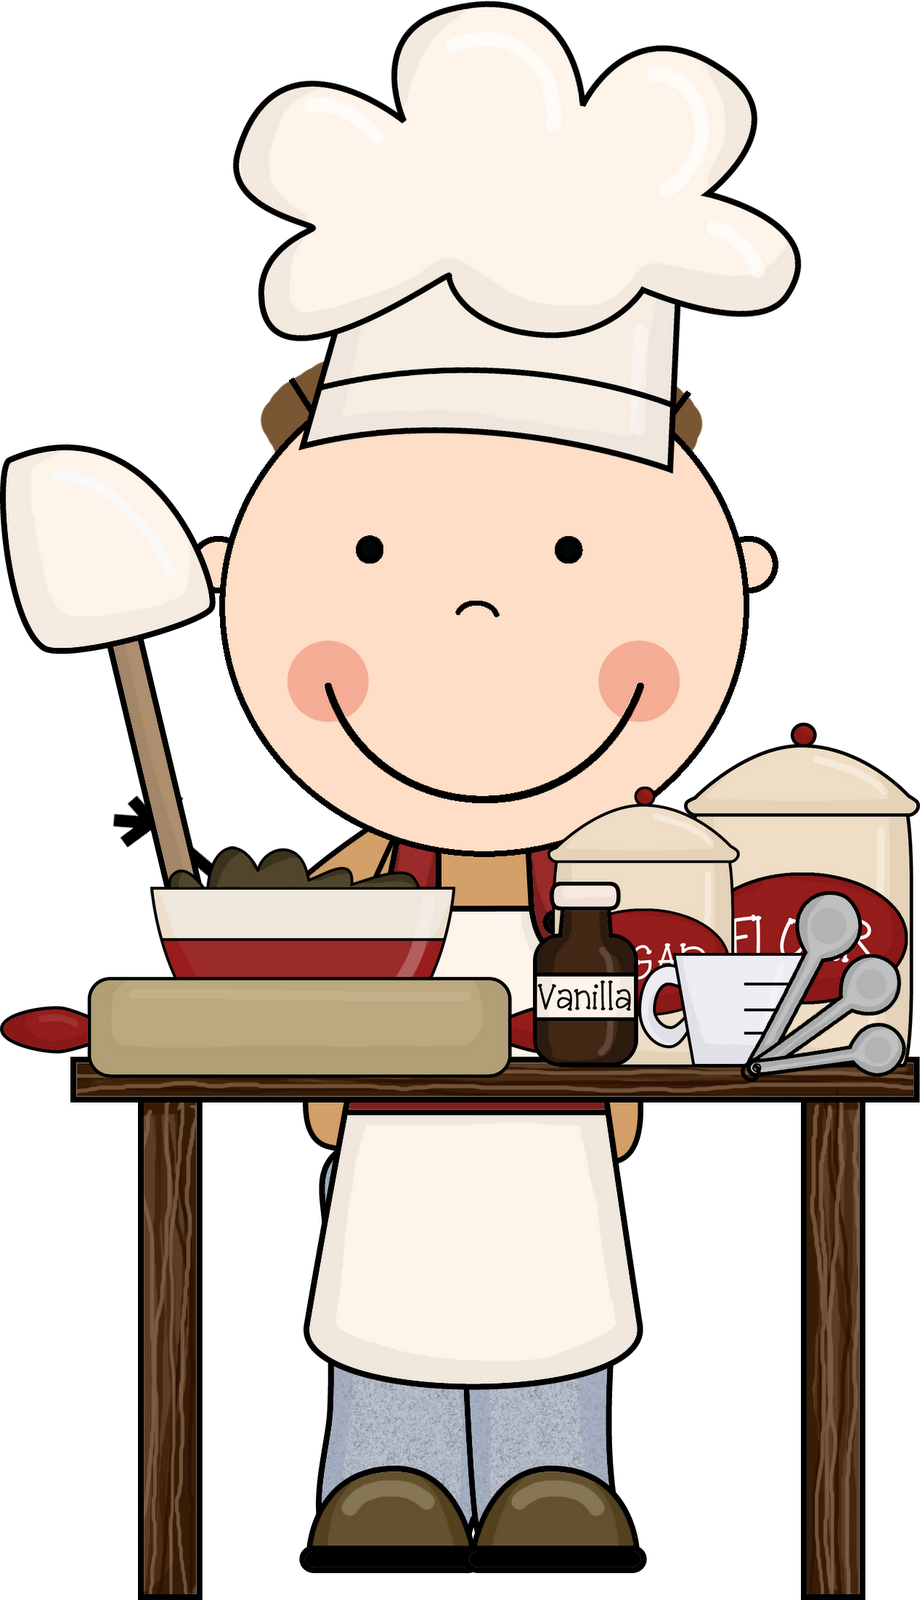 chef-cooking-clipart-7-image-17682